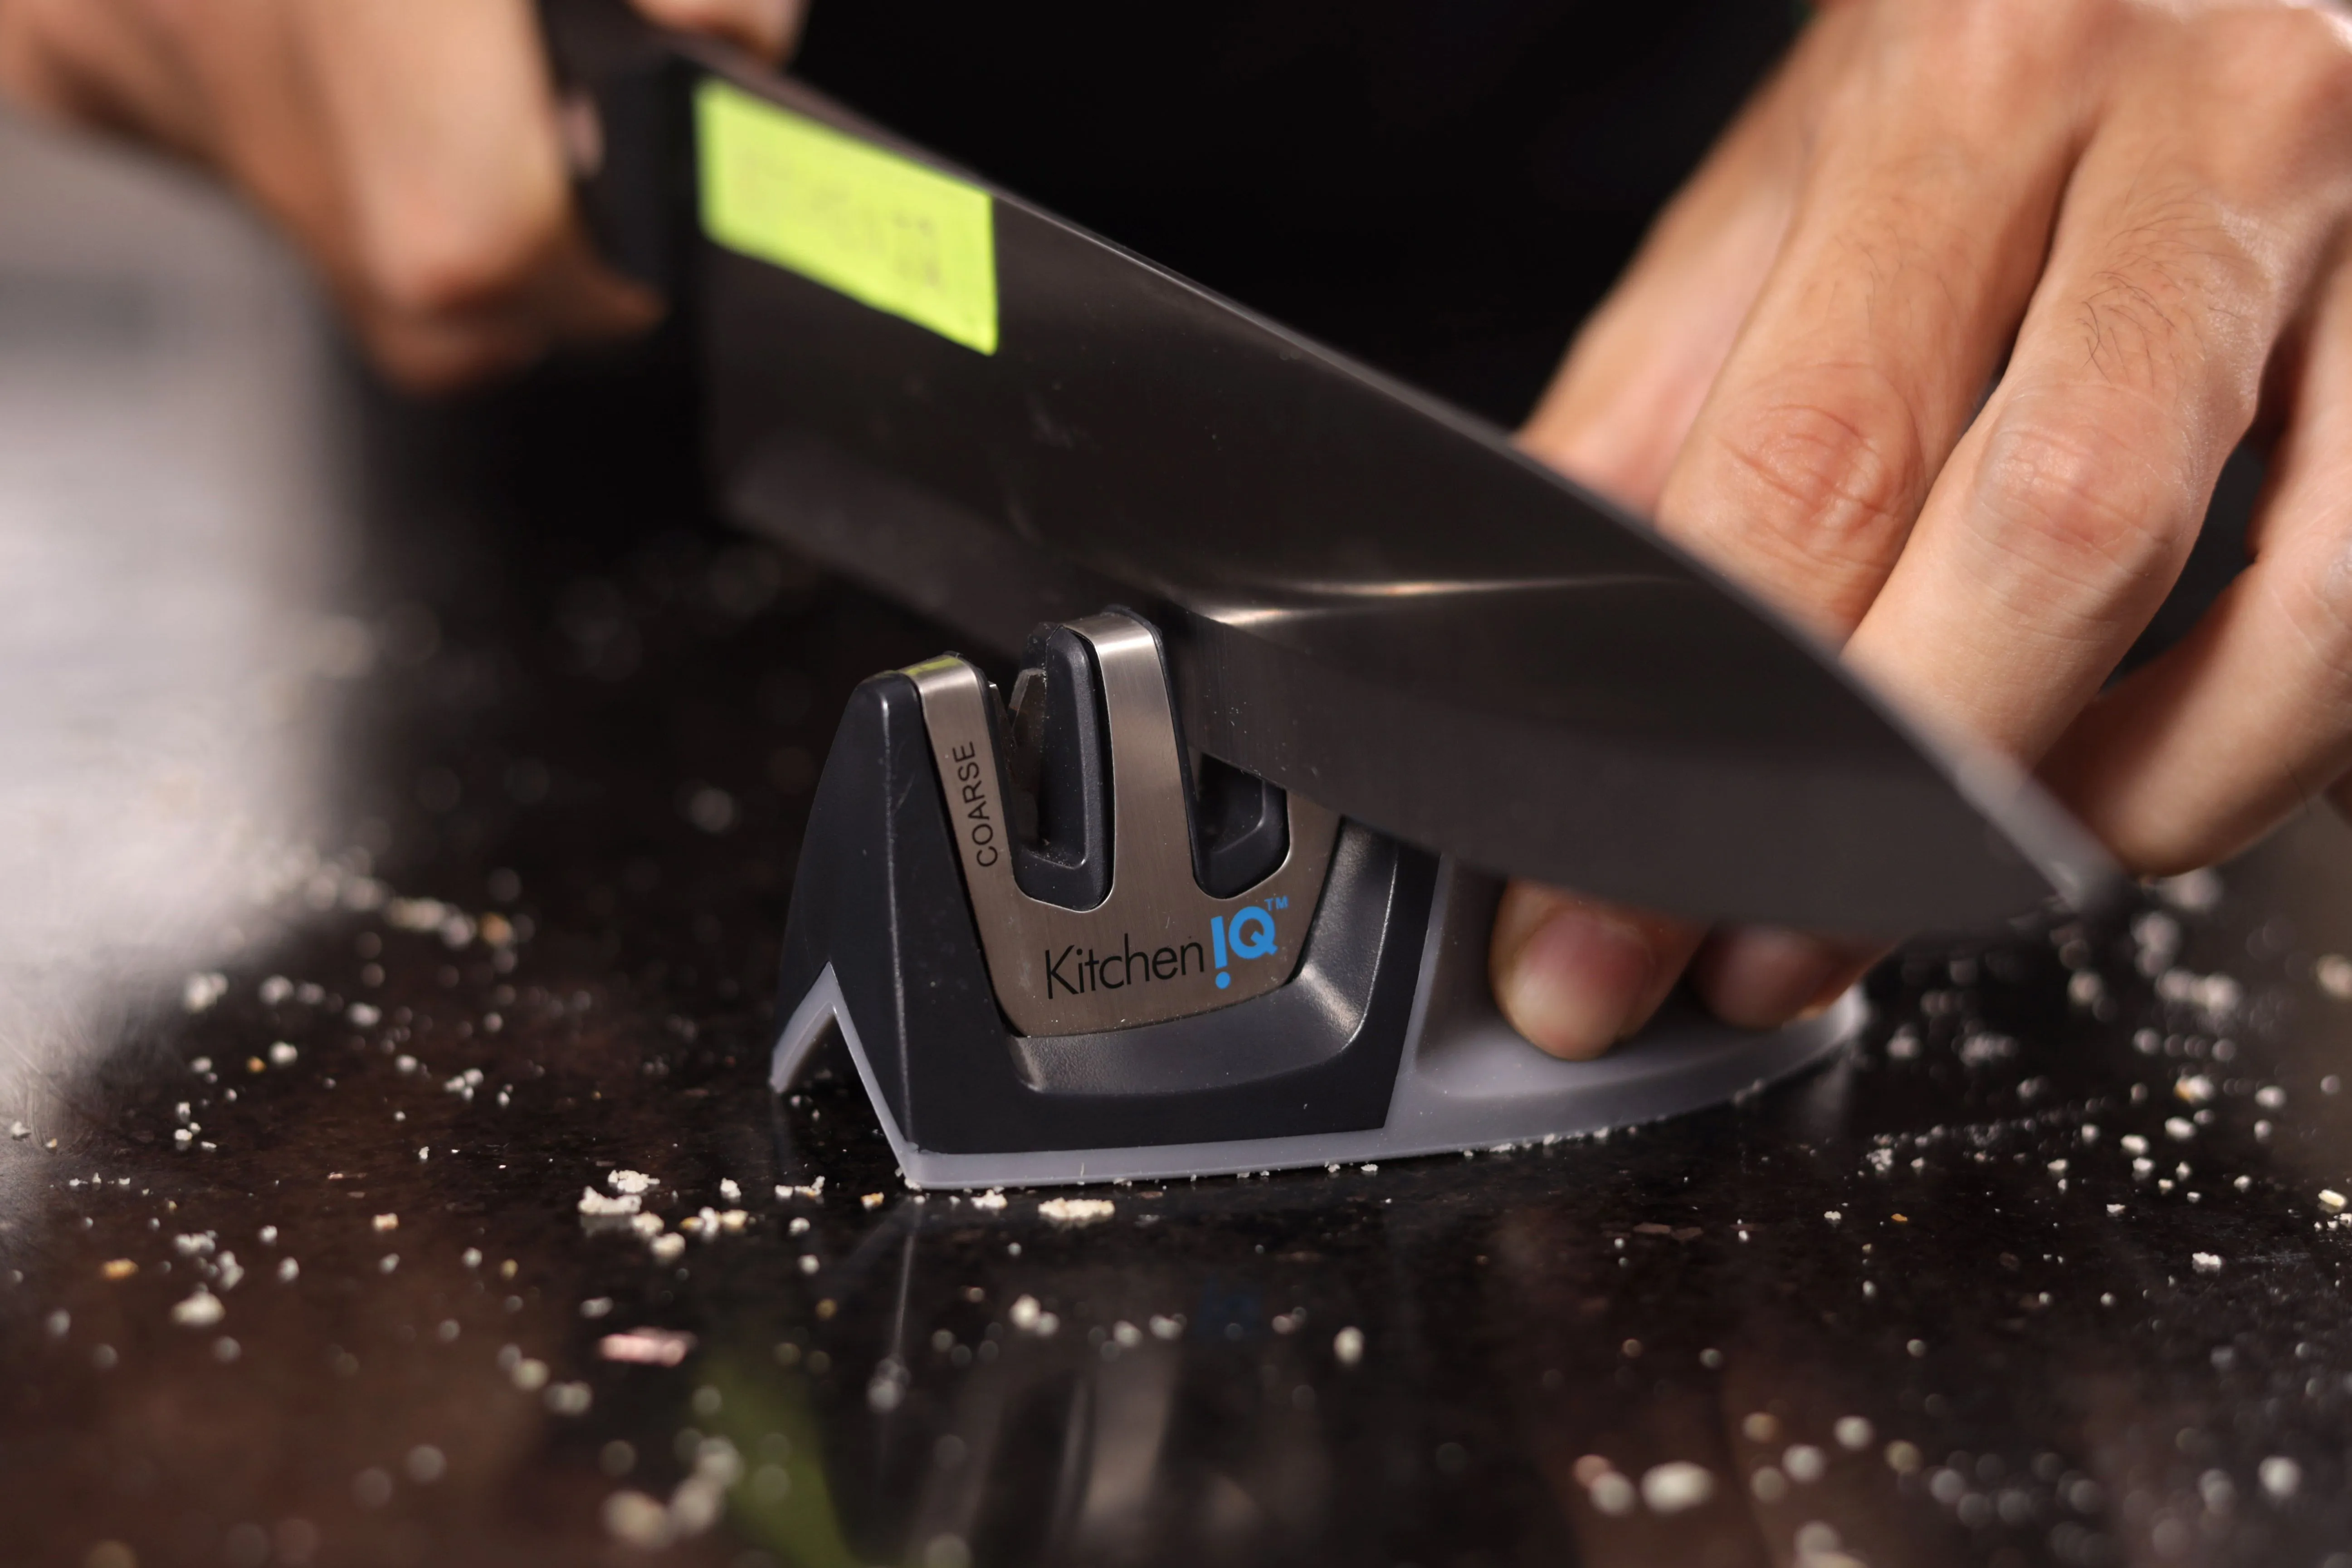 EDGE 2 Two Stage Hand Held Knife Sharpener